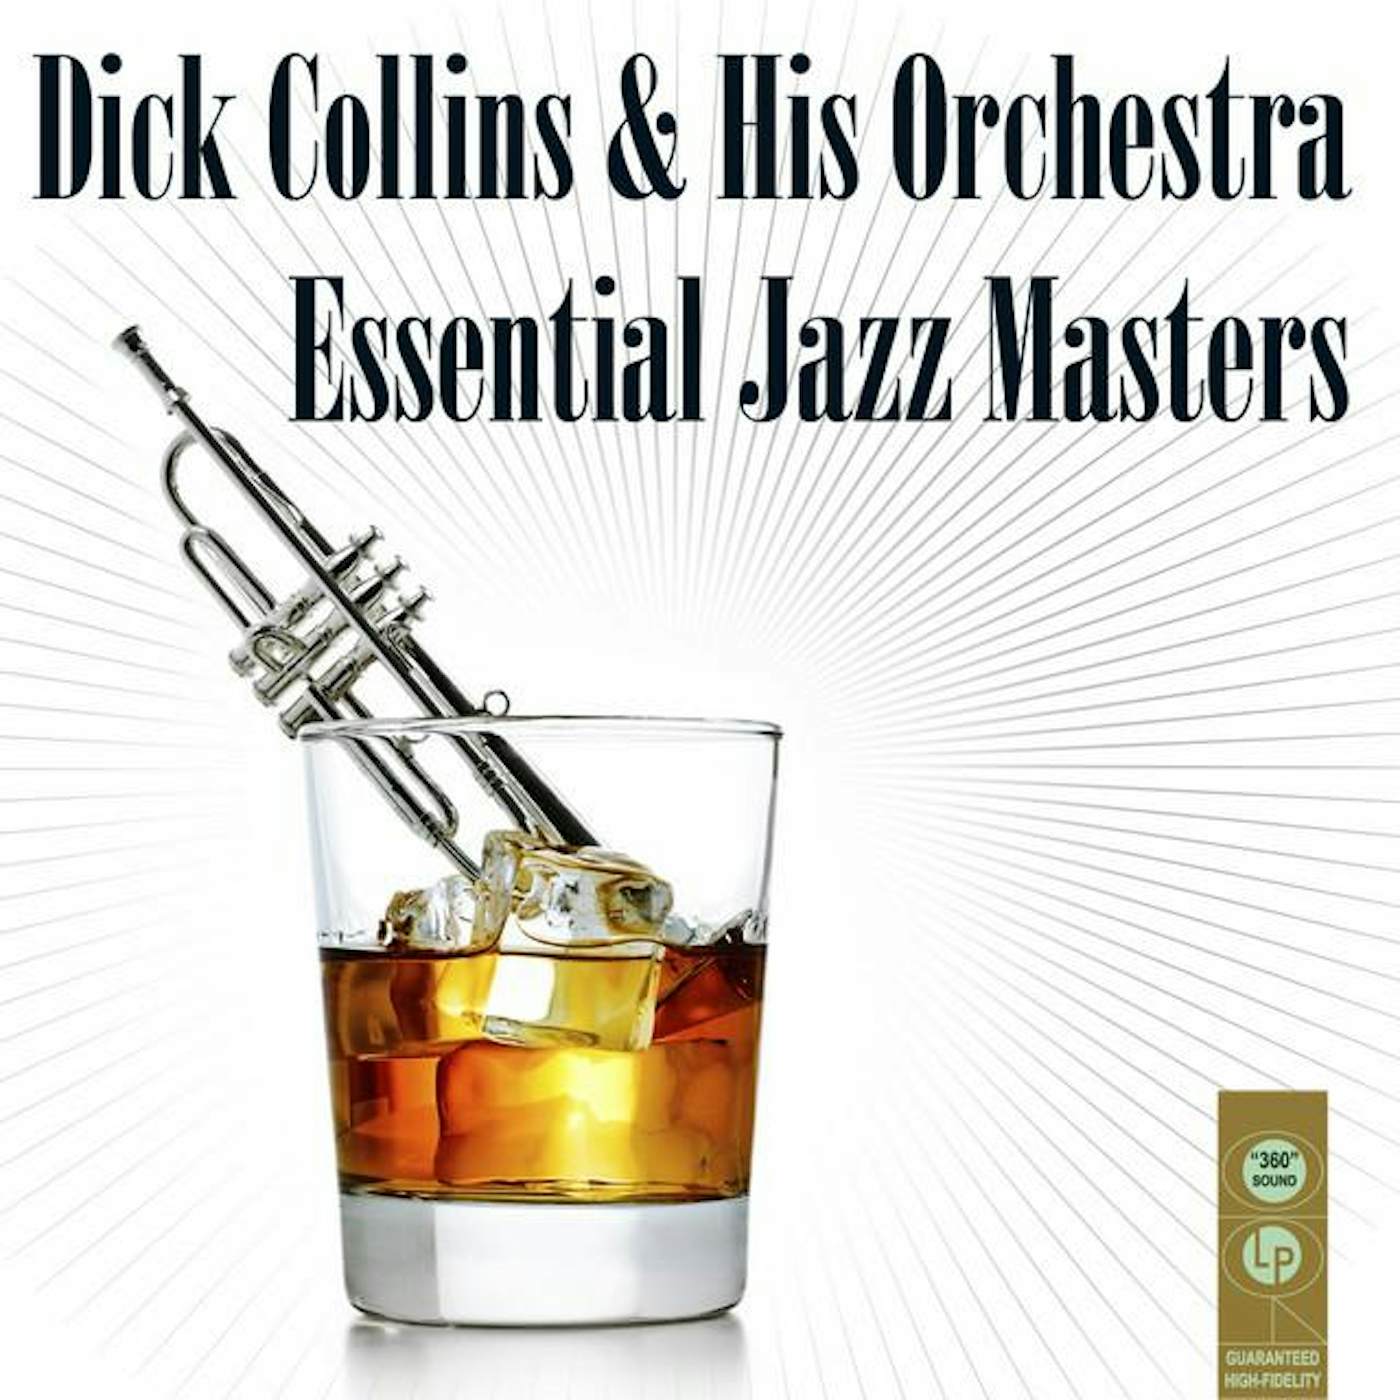 Dick Collins & His Orchestra